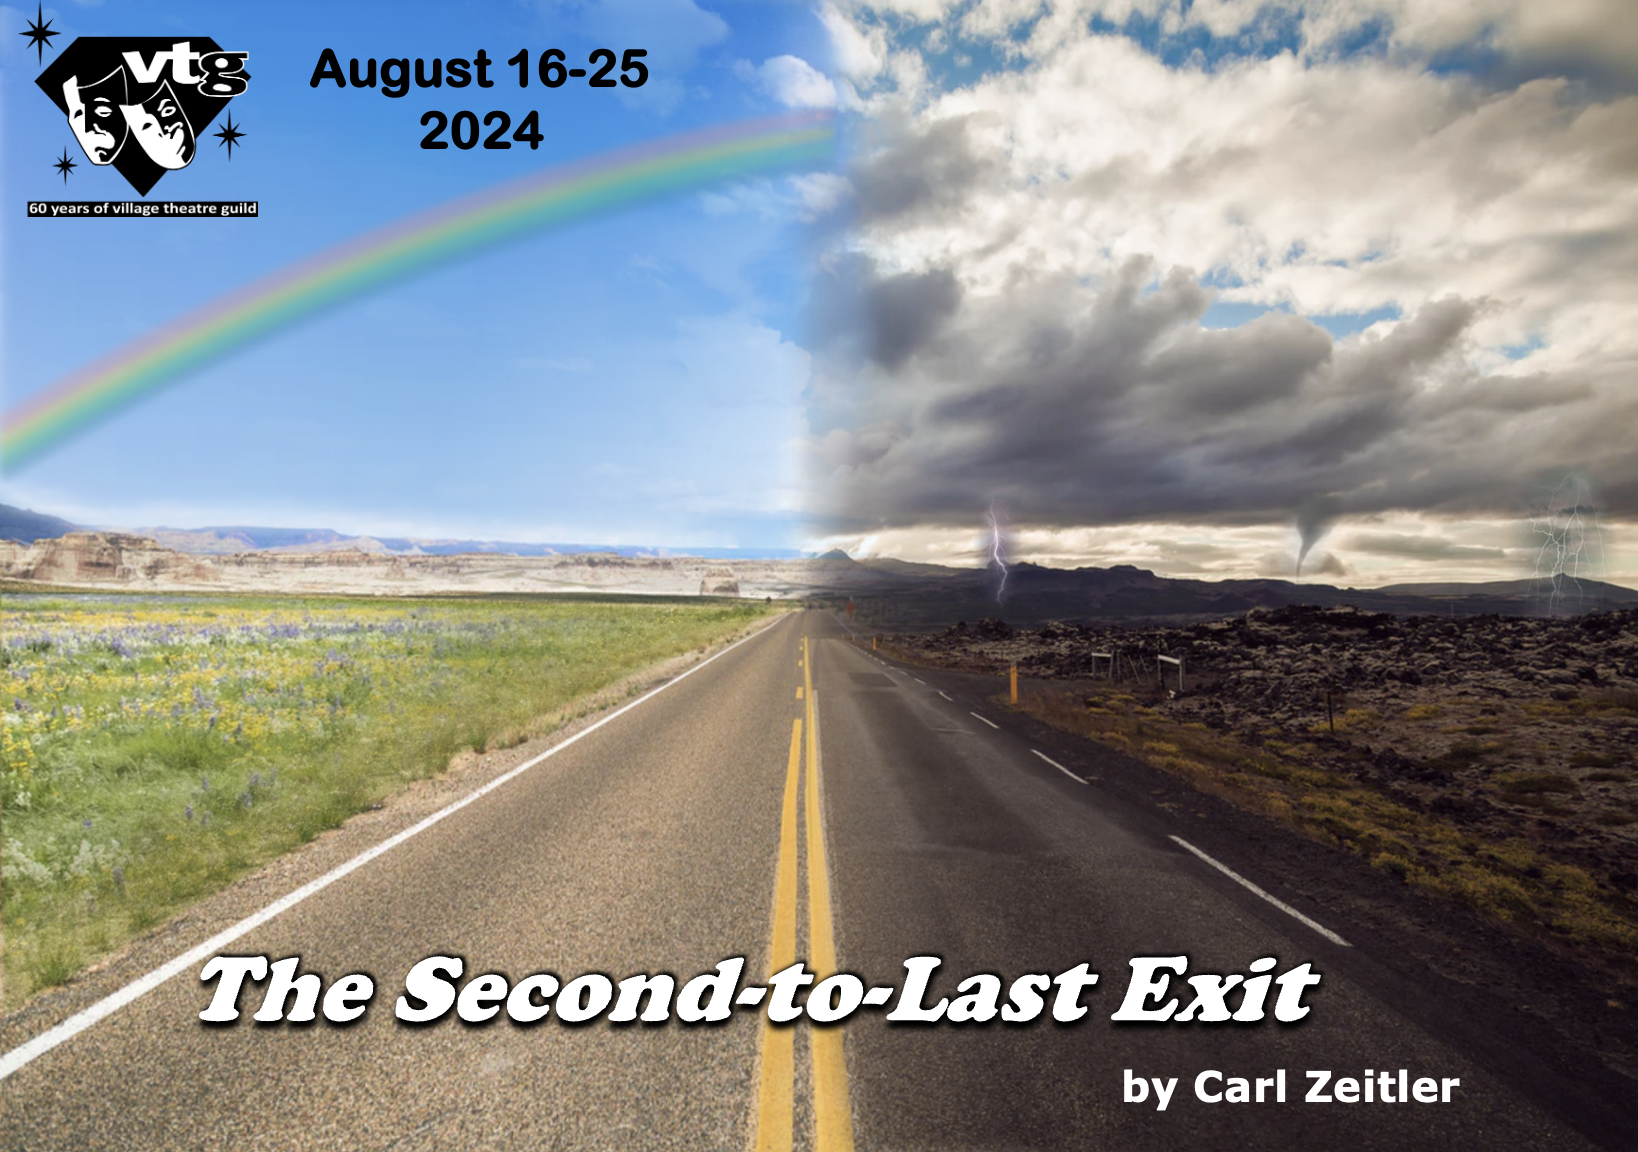 The Second-to-Last Exit